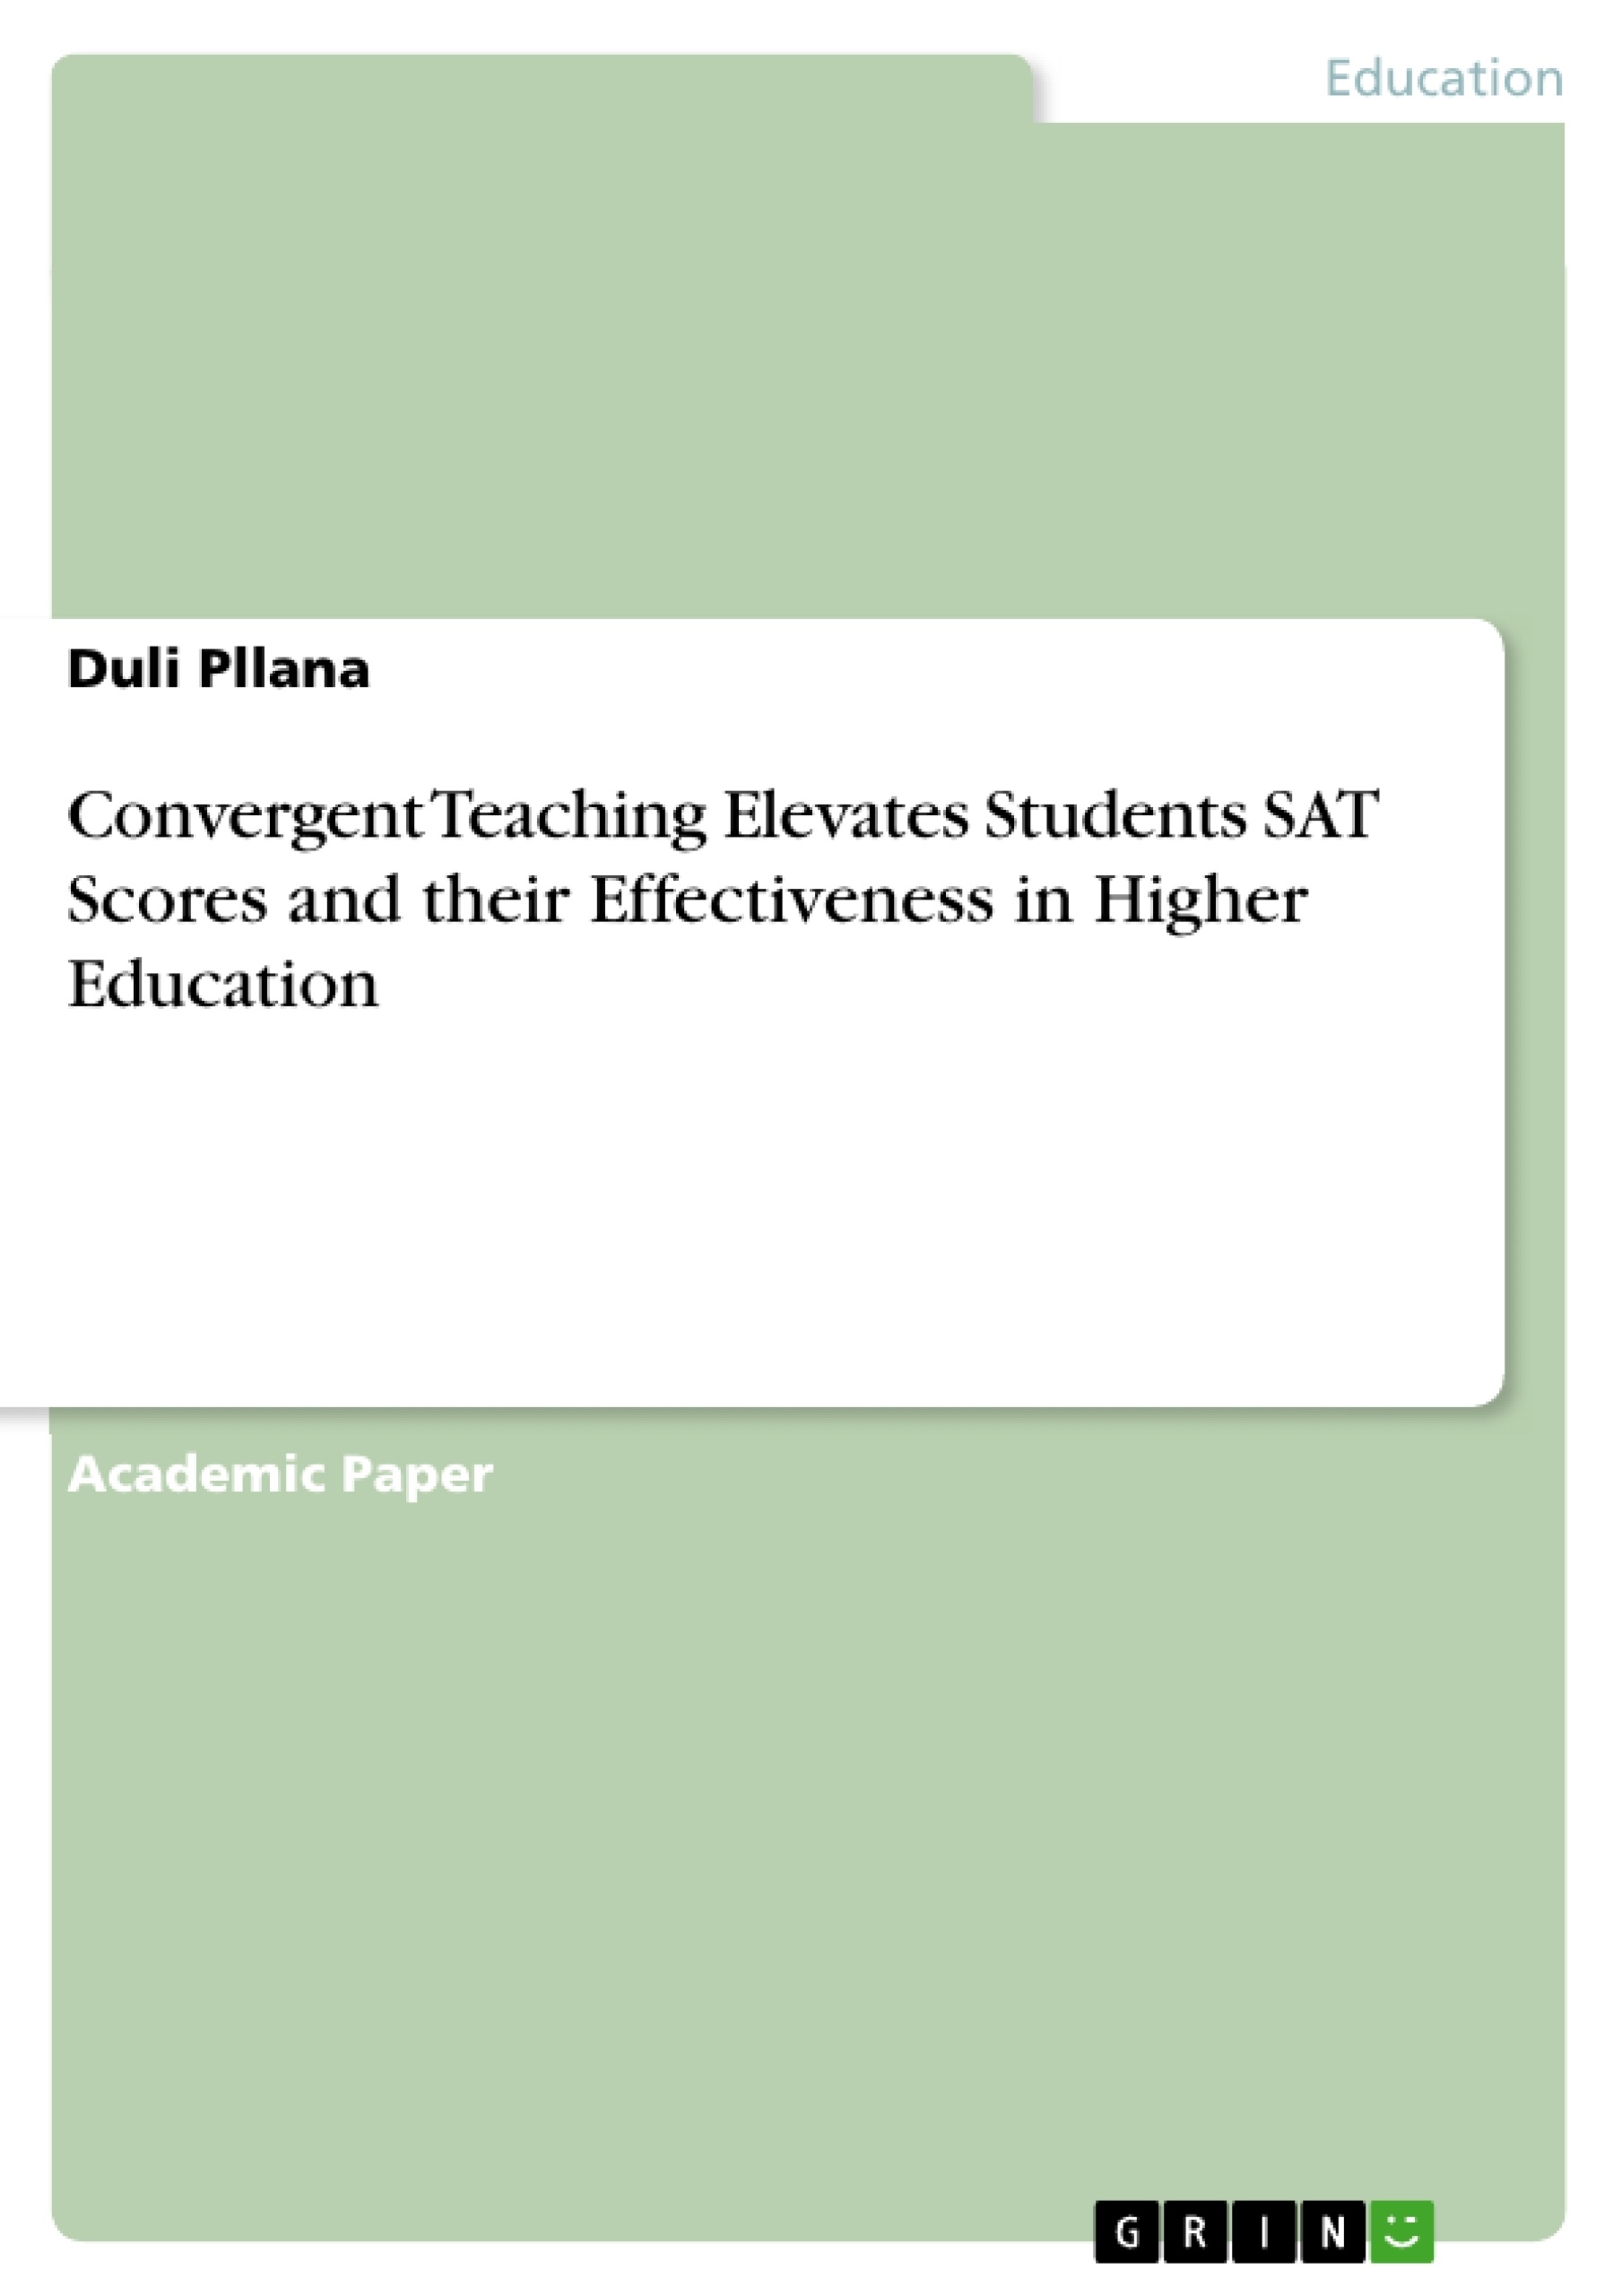 Title: Convergent Teaching Elevates Students SAT Scores and their Effectiveness in Higher Education